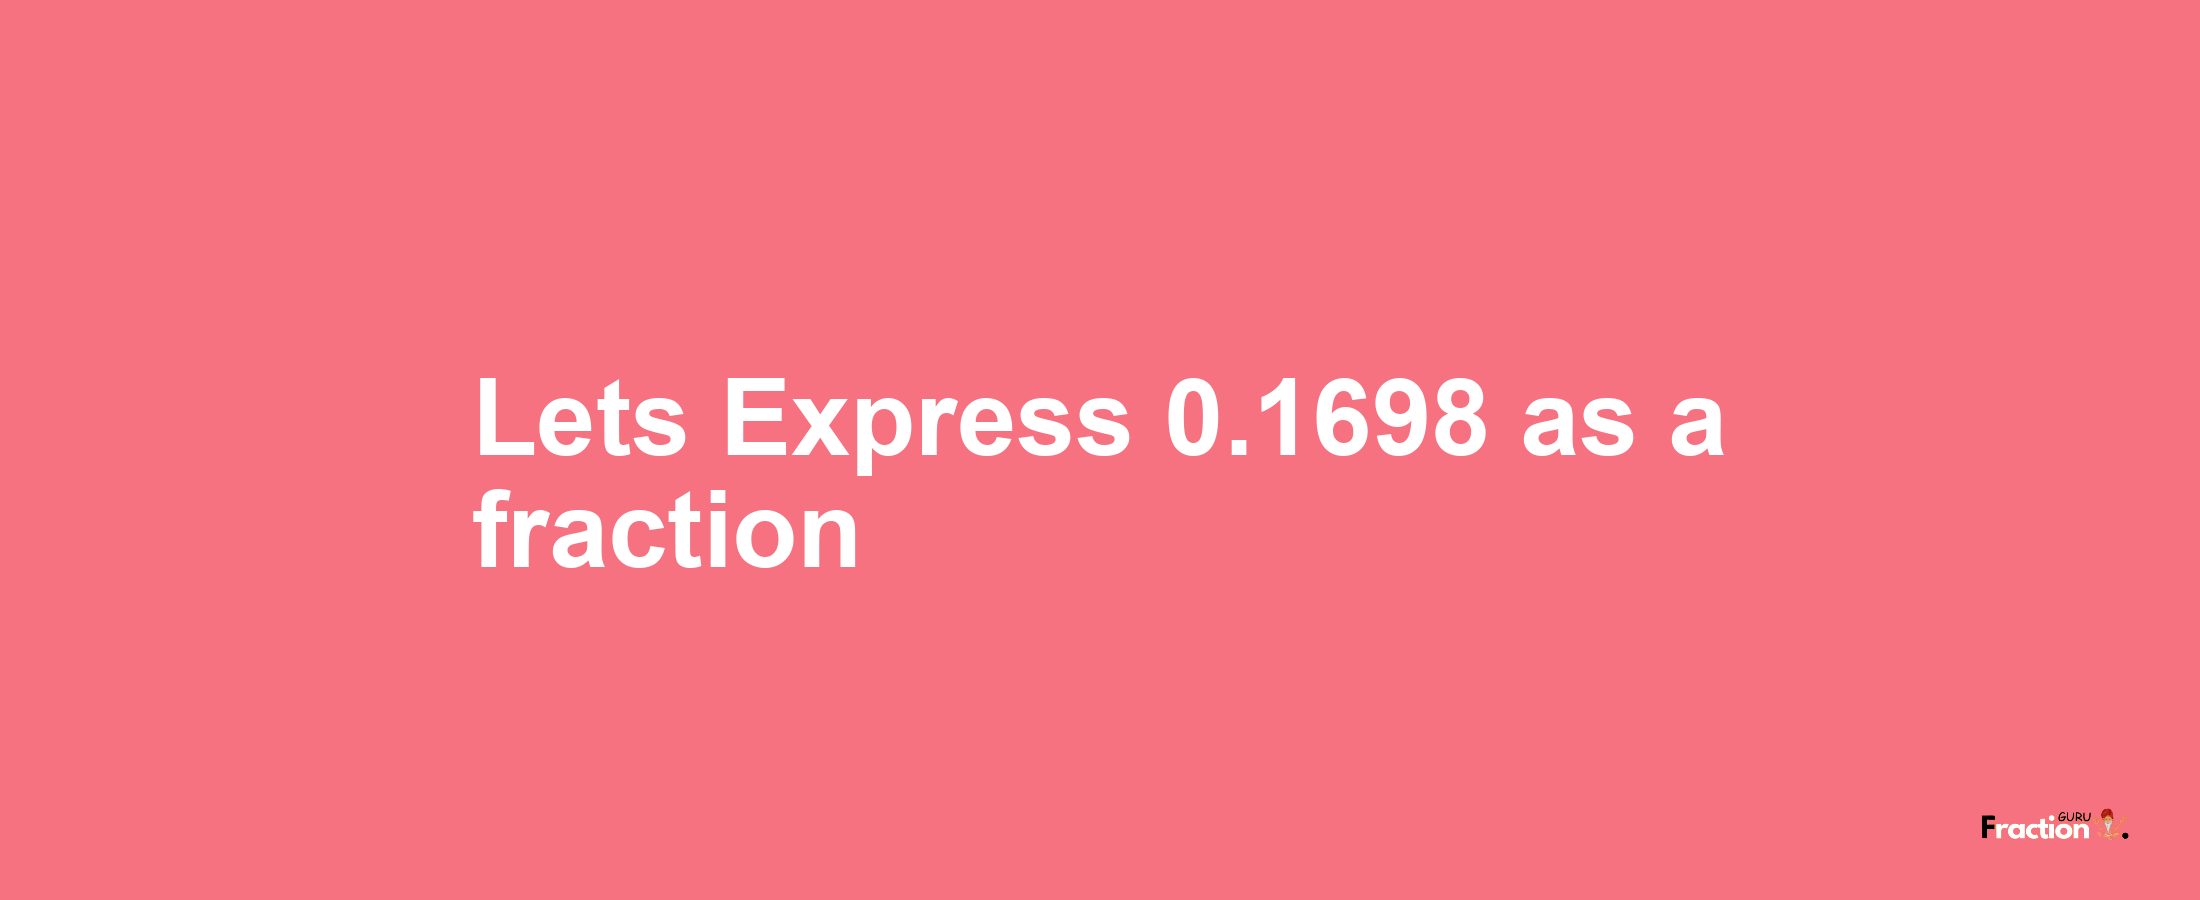 Lets Express 0.1698 as afraction